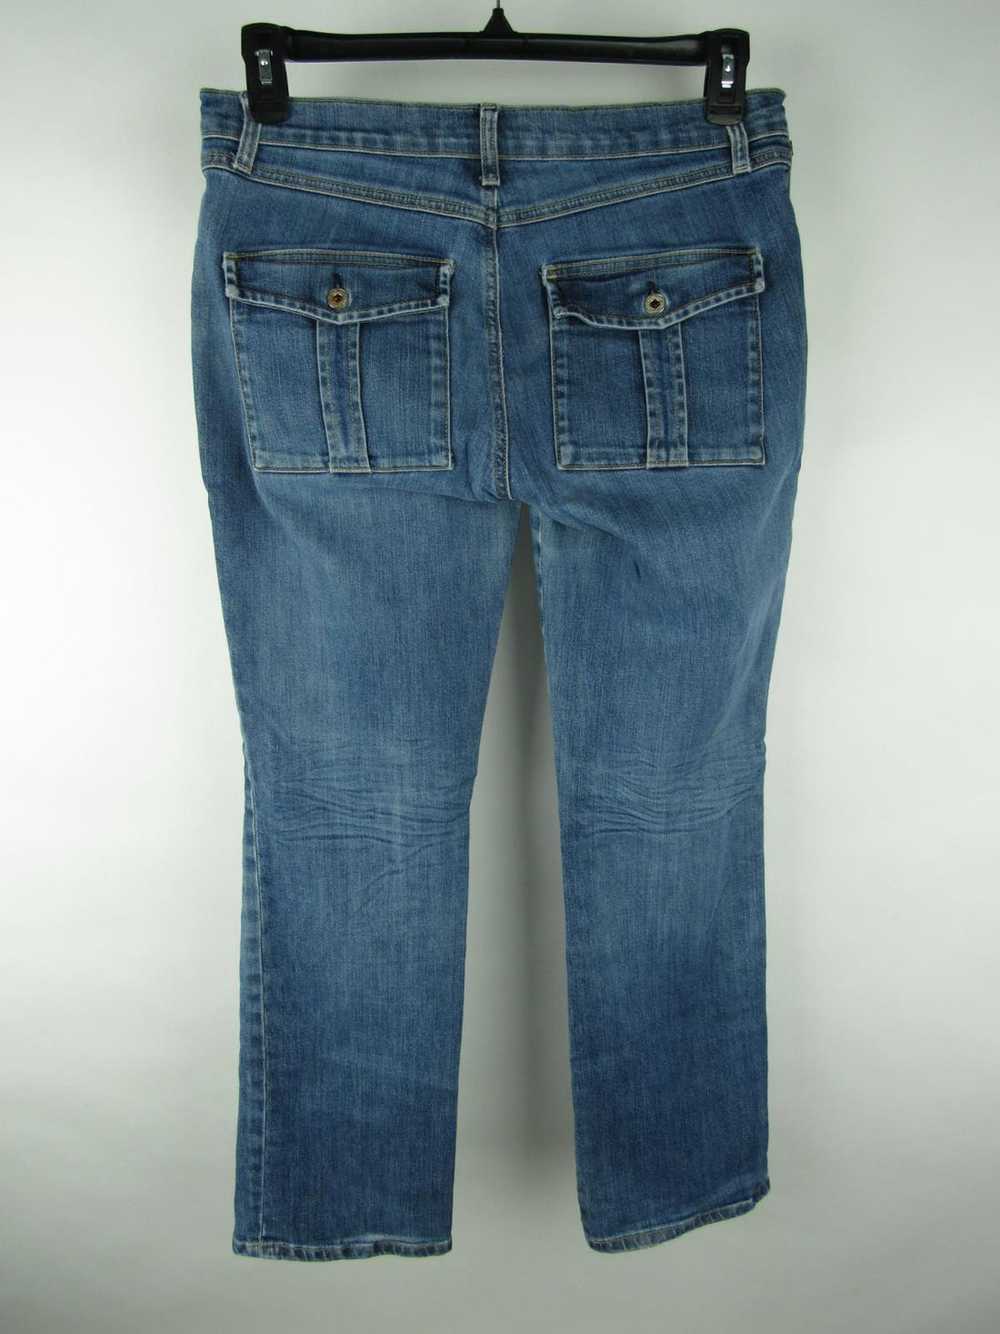 Polo Jeans Company Ralph Lauren Straight Jeans - image 2